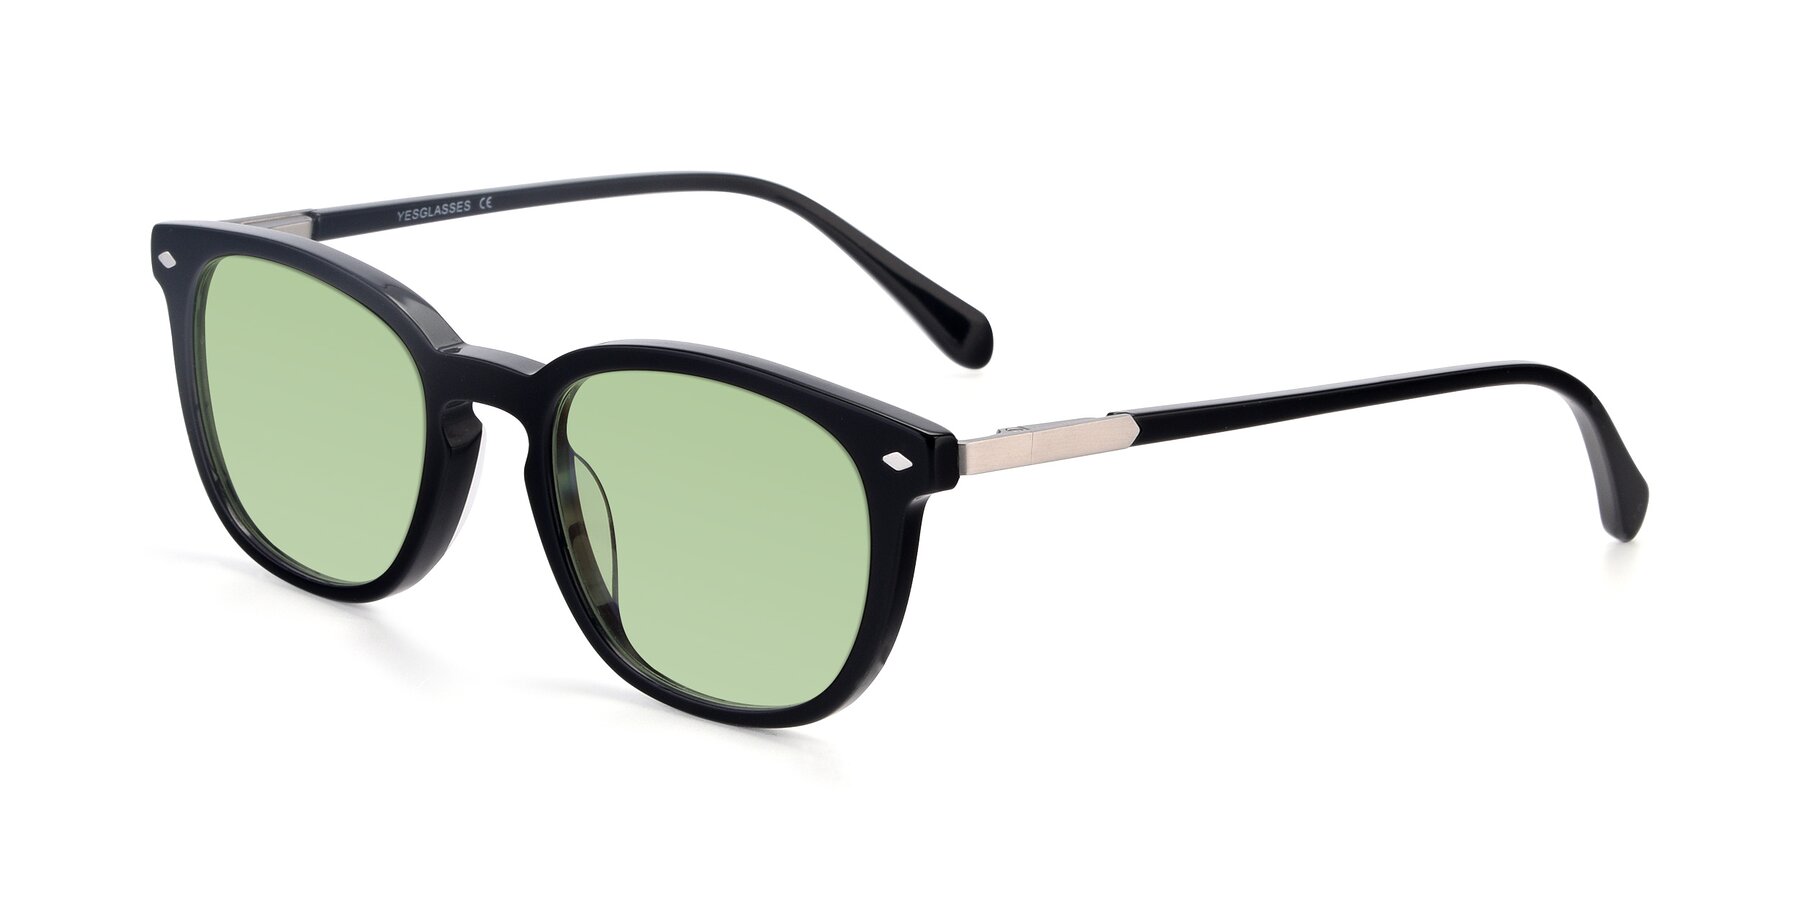 Angle of 17578 in Black with Medium Green Tinted Lenses